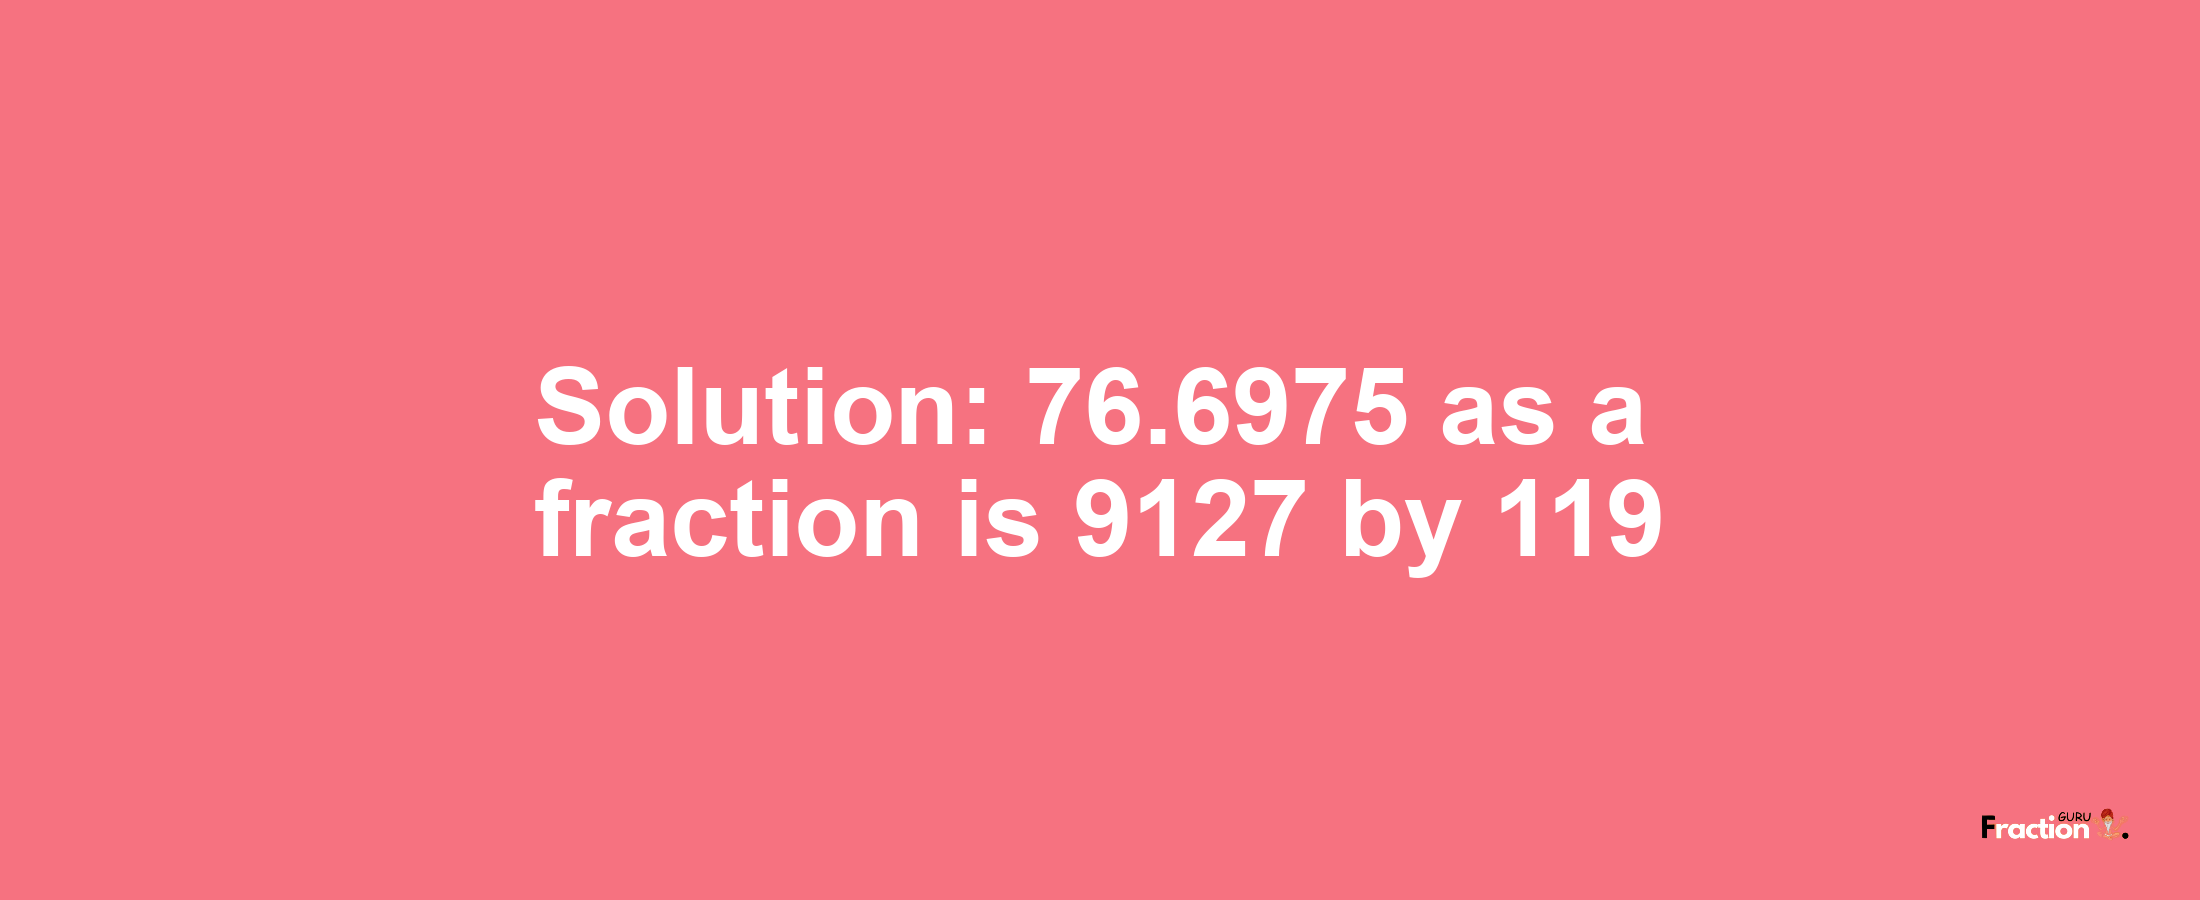 Solution:76.6975 as a fraction is 9127/119